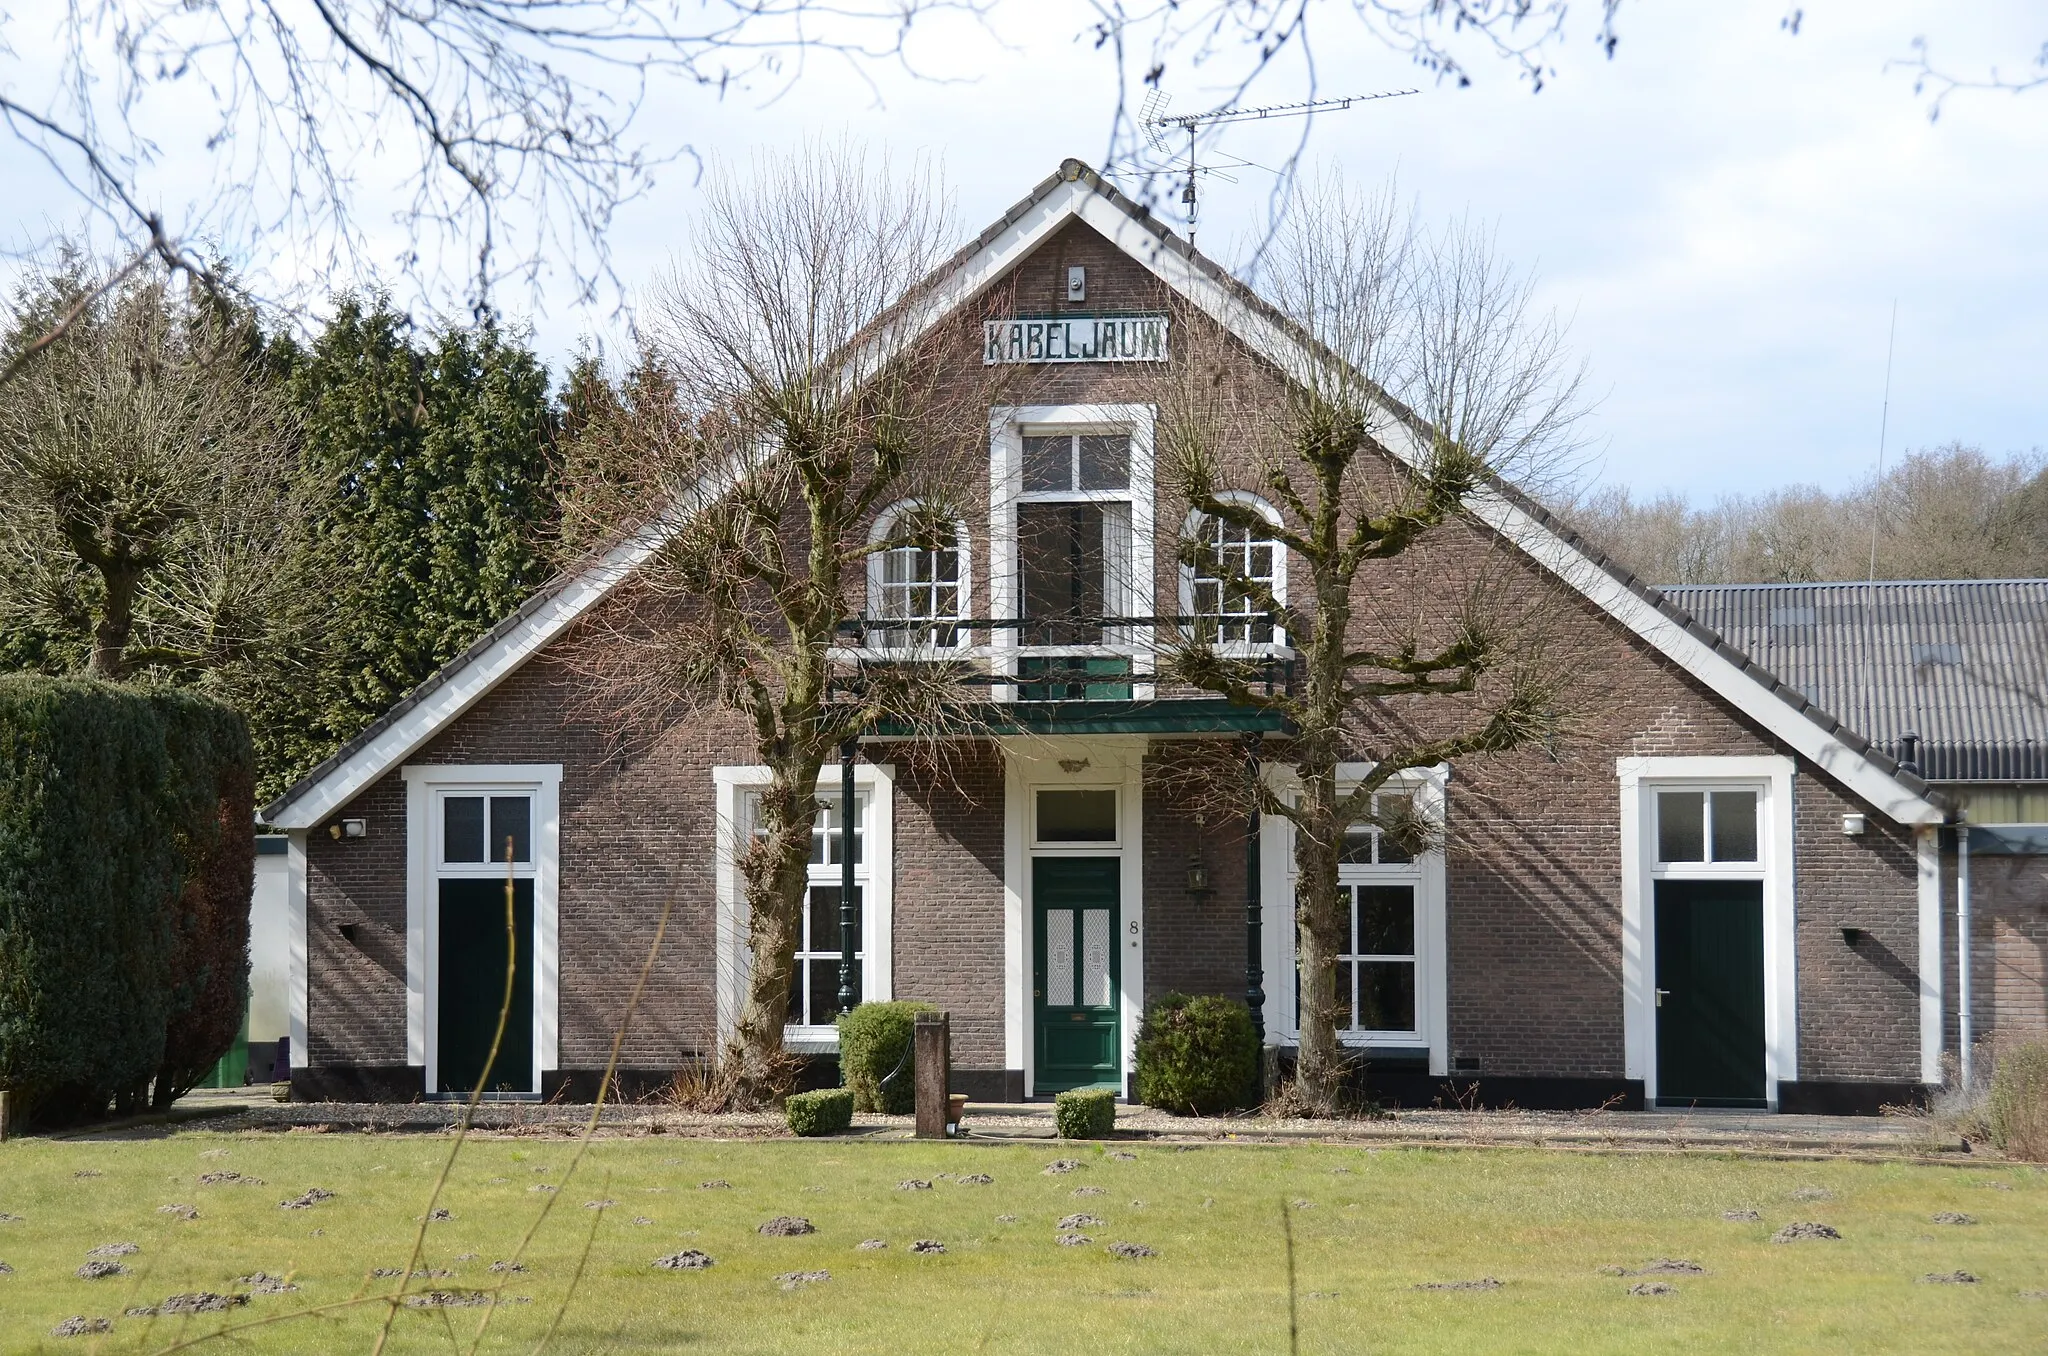 Photo showing: A traditional Dutch farm, called Kabeljauw (a sea fish) near the Doorwerth park